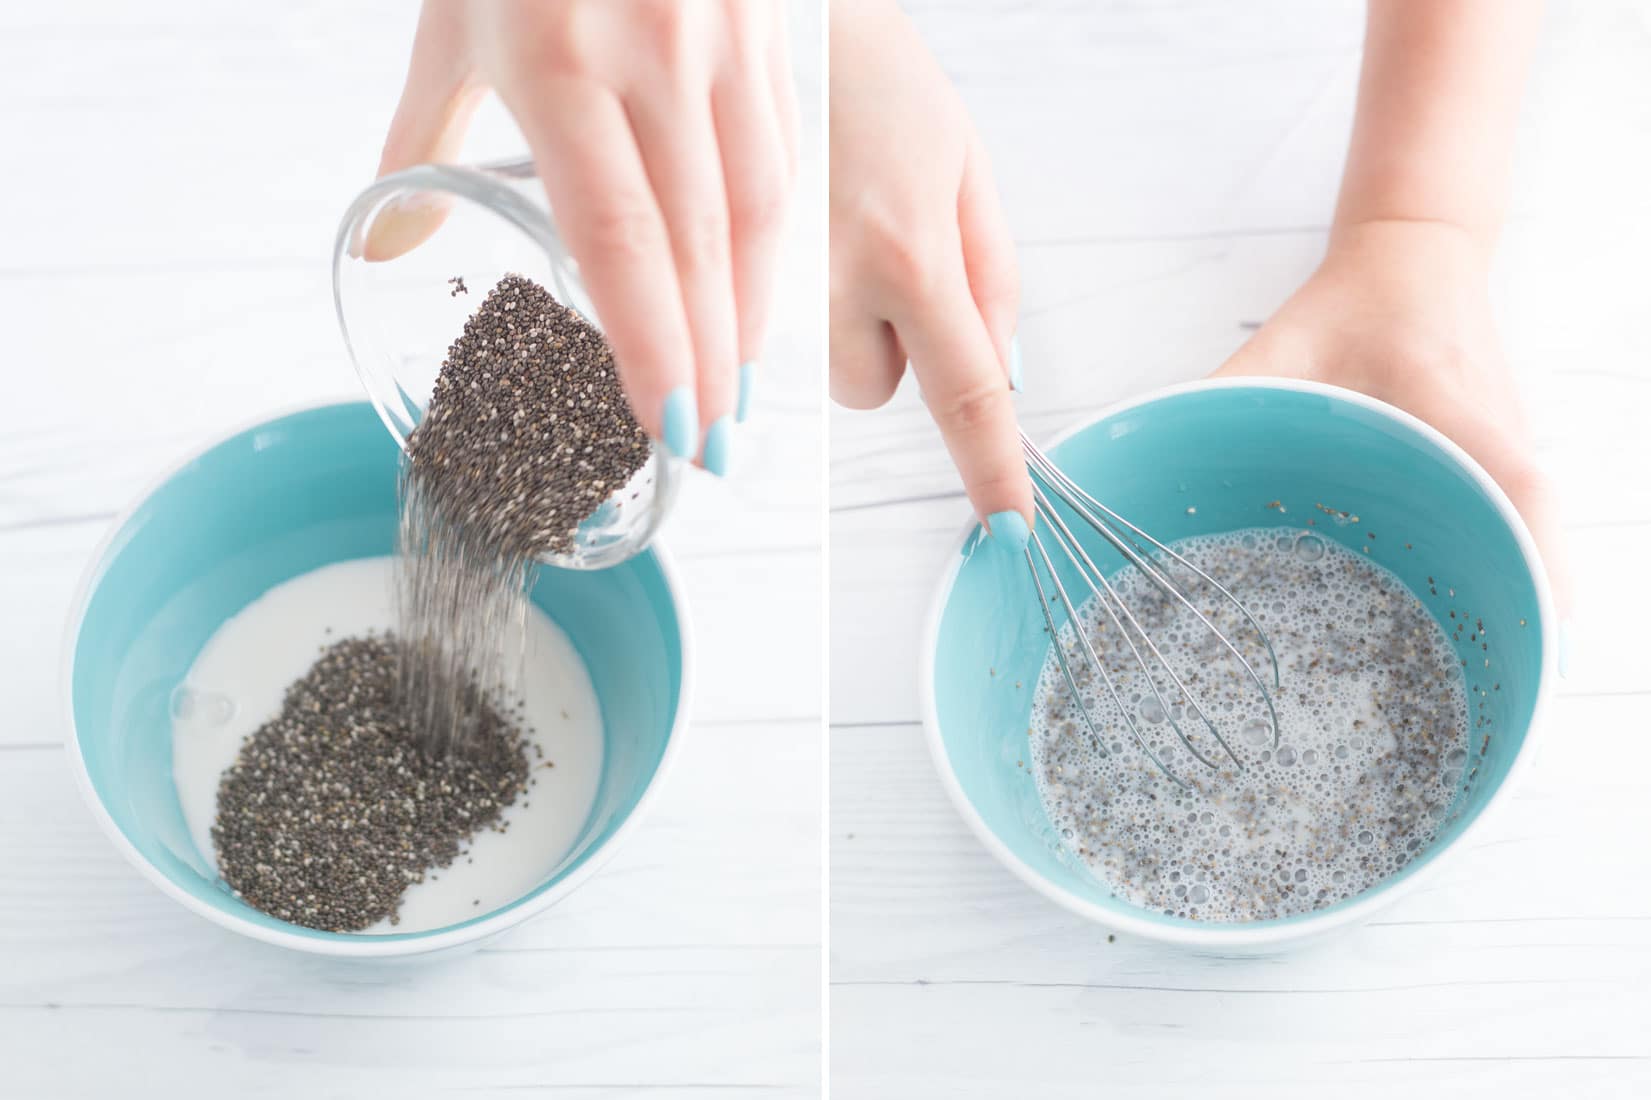 hand pouring chia seeds into blue bowl filled with almond milk. Hands mixing almond milk and chia seeds.